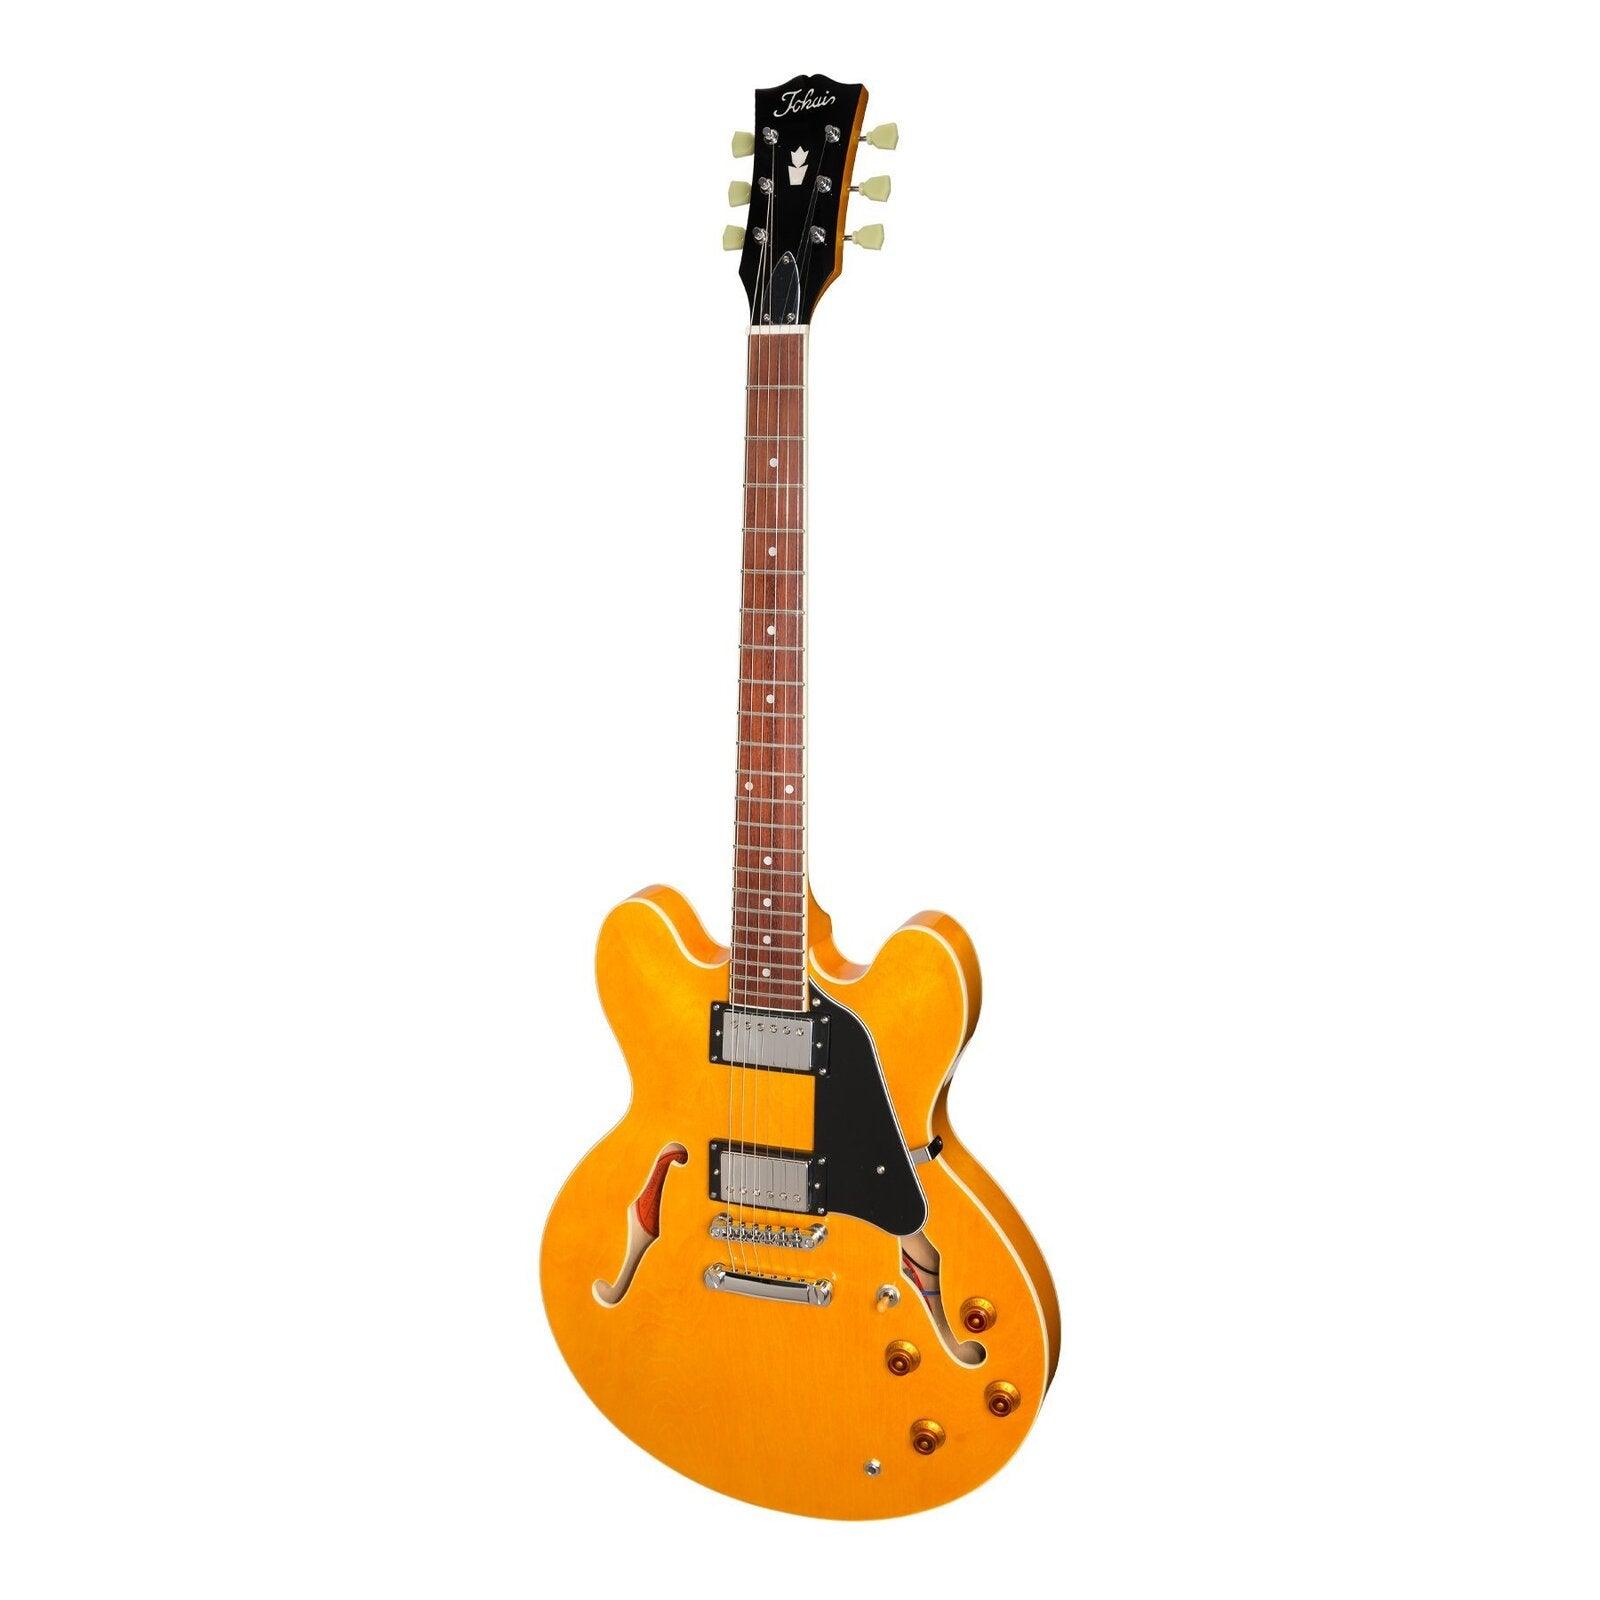 Tokai Traditional Series 335 Style Semi-acoustic Guitarwith Gig Bag - Guitars - Hollowbodies by Tokai at Muso's Stuff